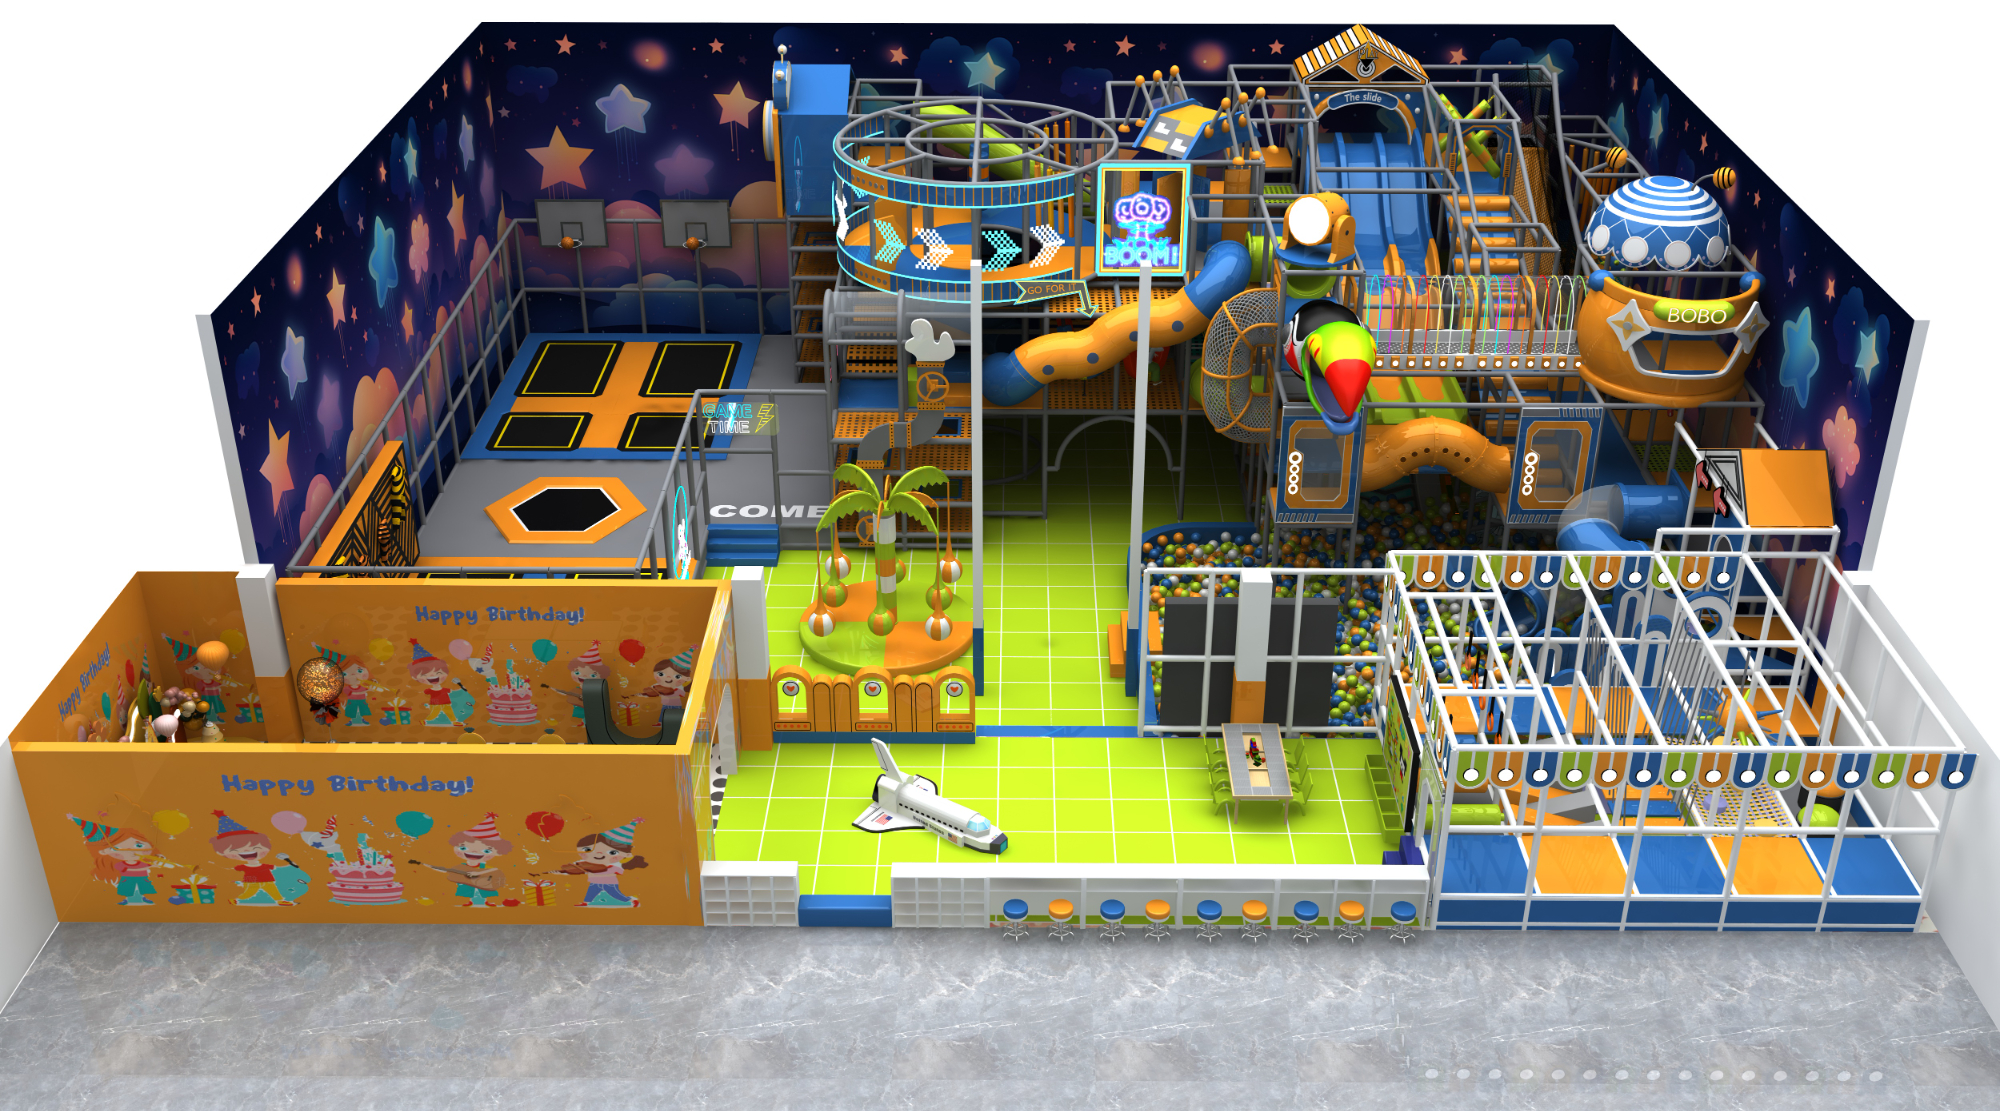 Designing Joyful Spaces: The Art of Crafting Innovative Indoor Playgrounds